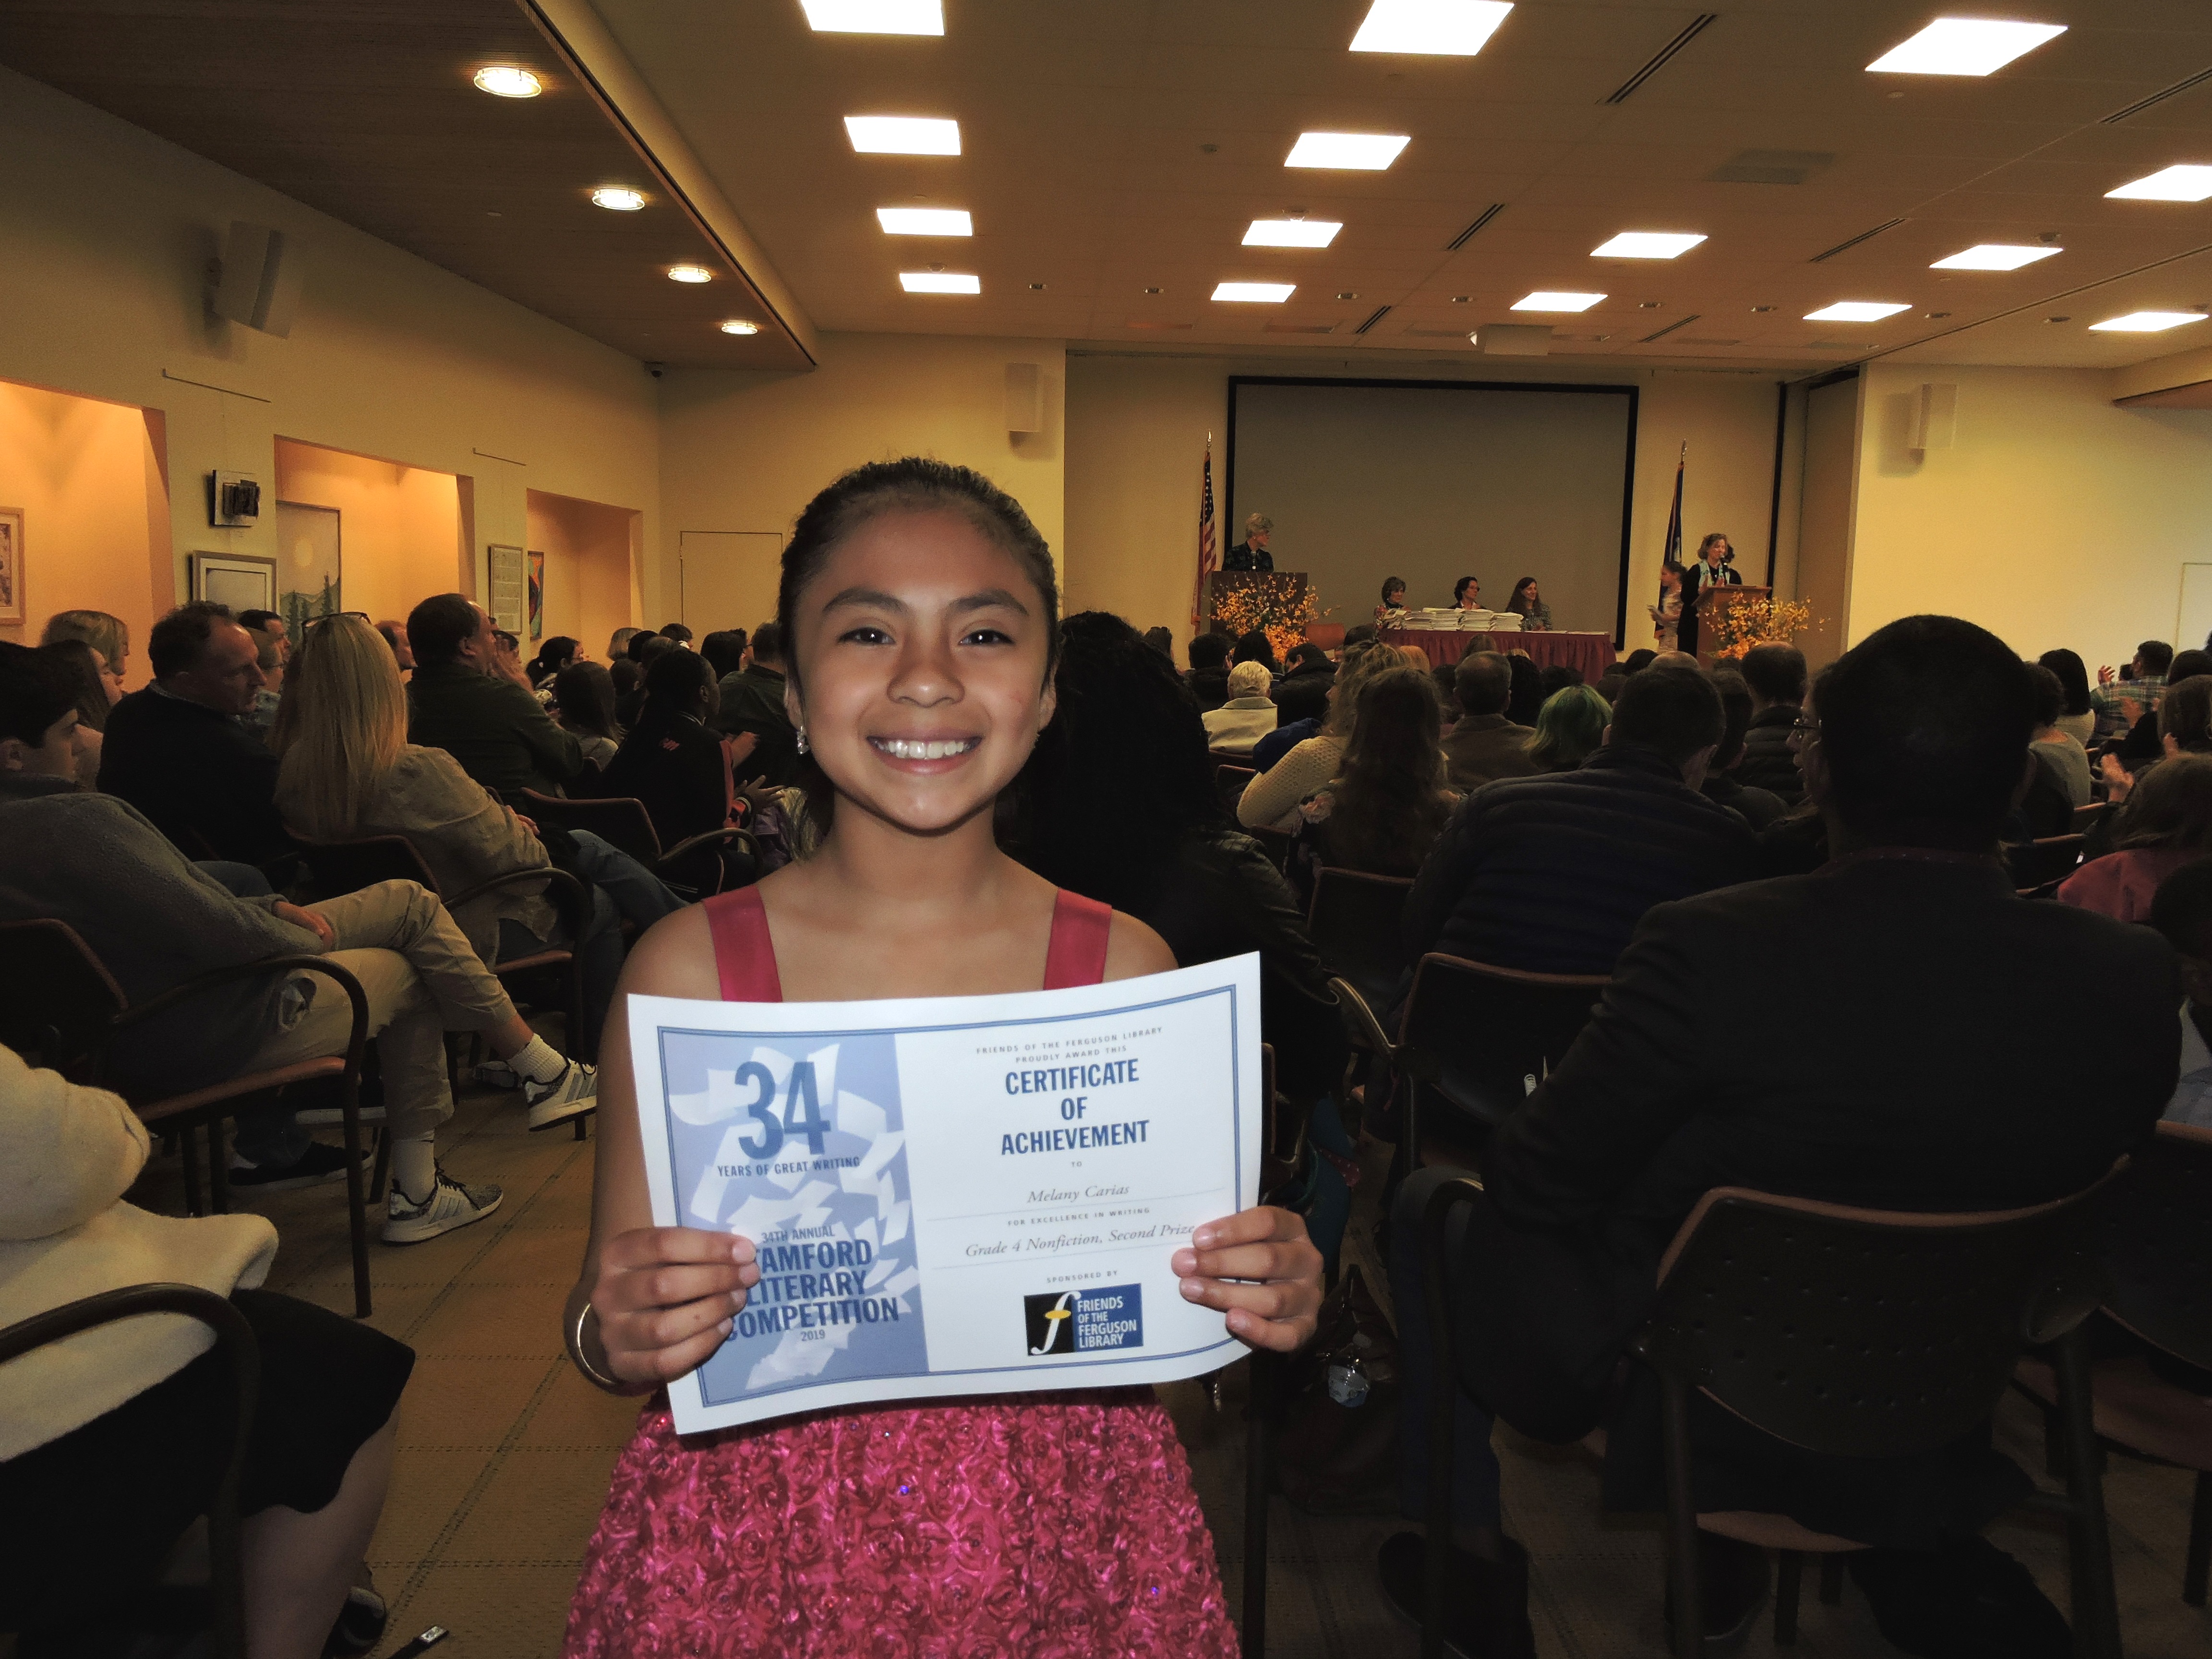 Grade 4 Nonfiction Literary Contest 2nd Place winner